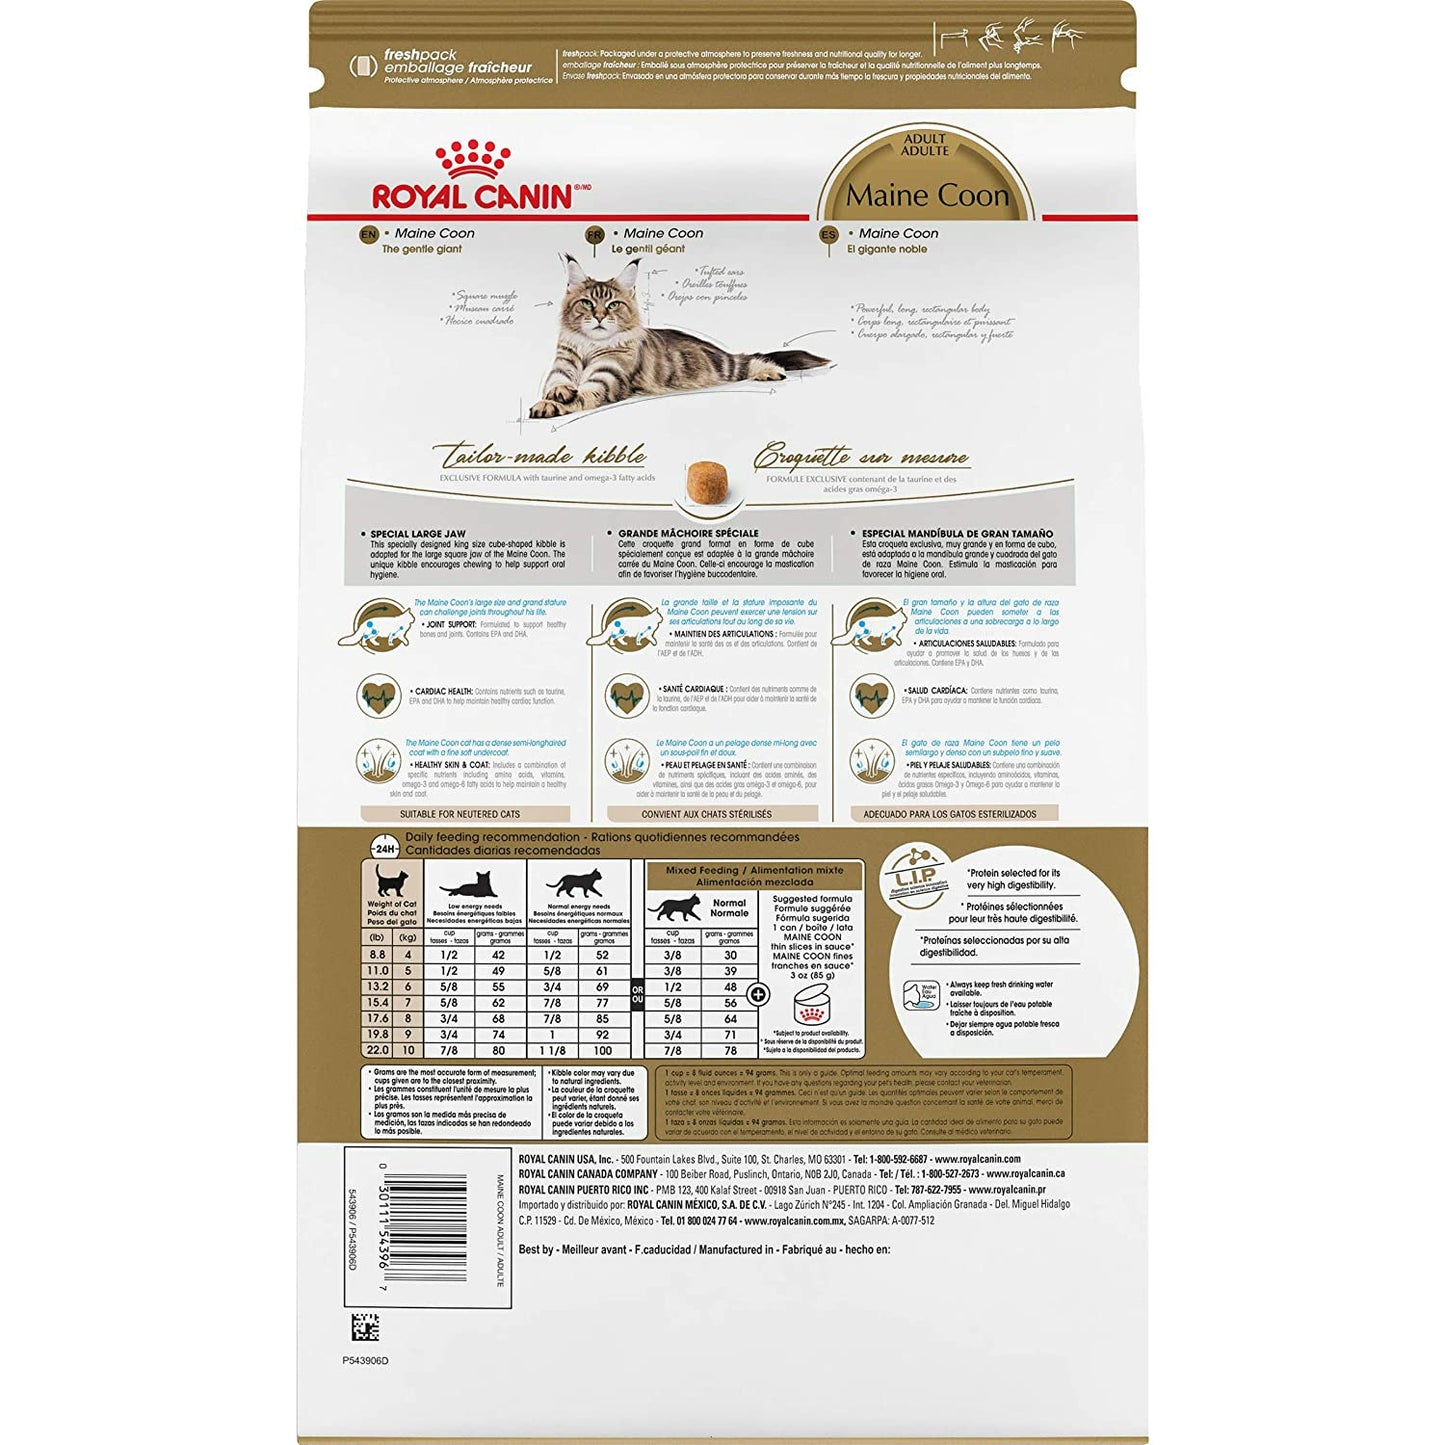 Royal Canin Feline Breed Nutrition Maine Coon Adult Dry Cat Food  Cat Food  | PetMax Canada